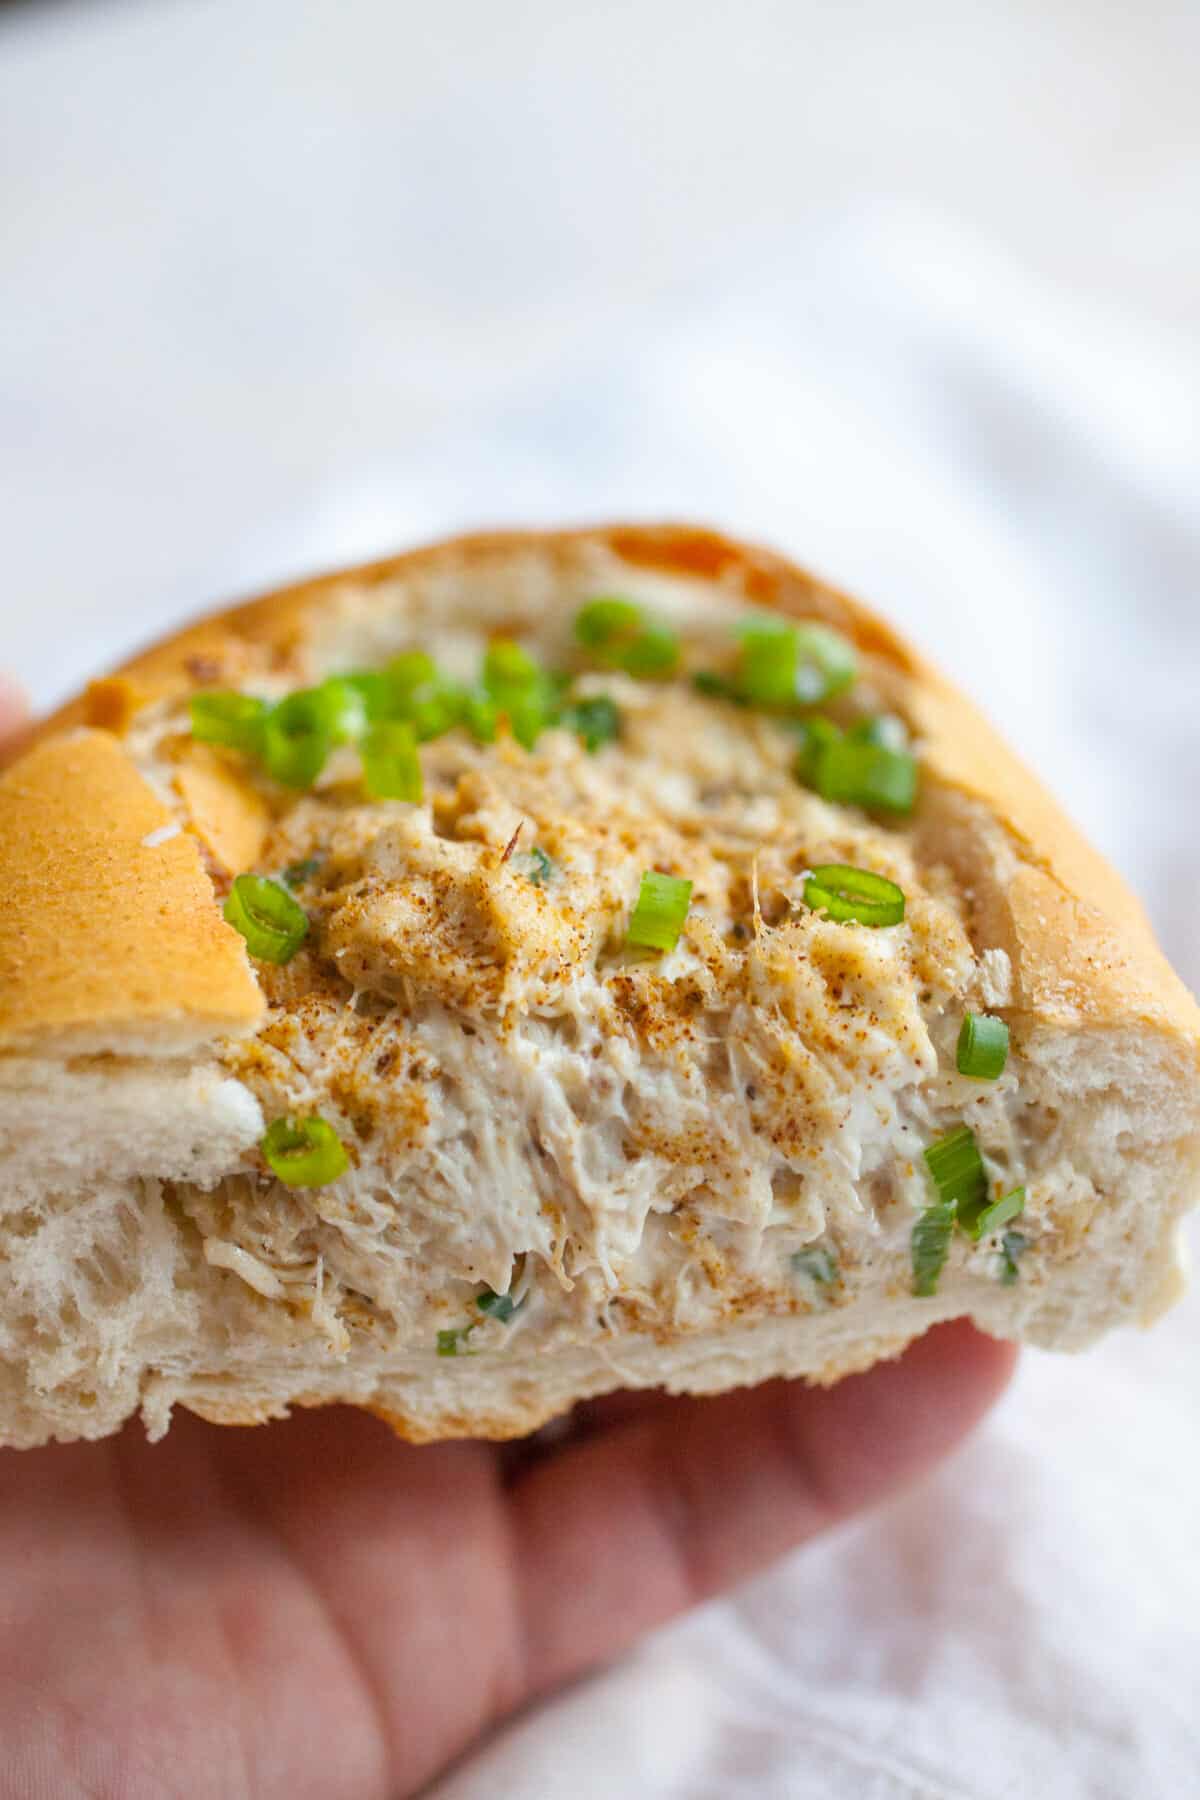 Crab Dip Stuffed French Bread: Easy crab dip stuffed and baked into a French loaf. A great party appetizer! Perfect for New Years! | macheesmo.com